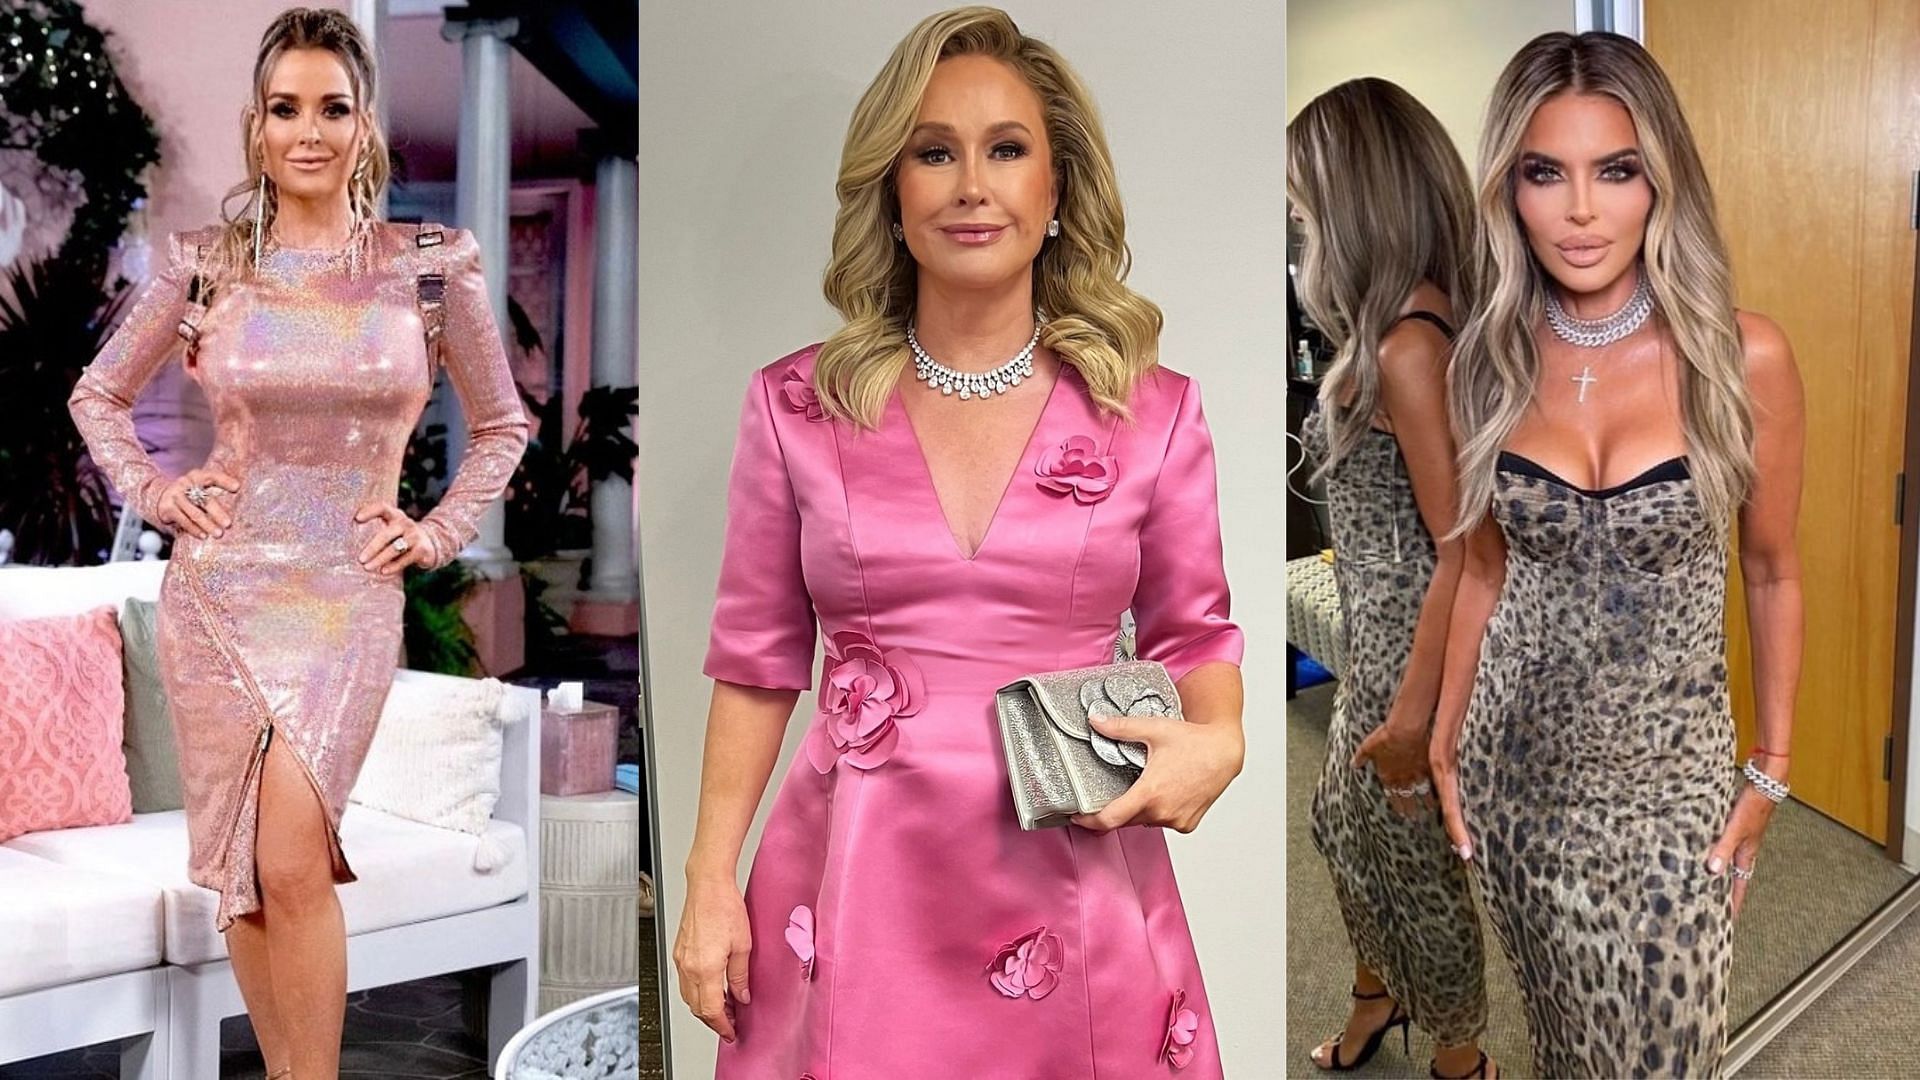 What time will Real Housewives of Beverly Hills (RHOBH) Season 12